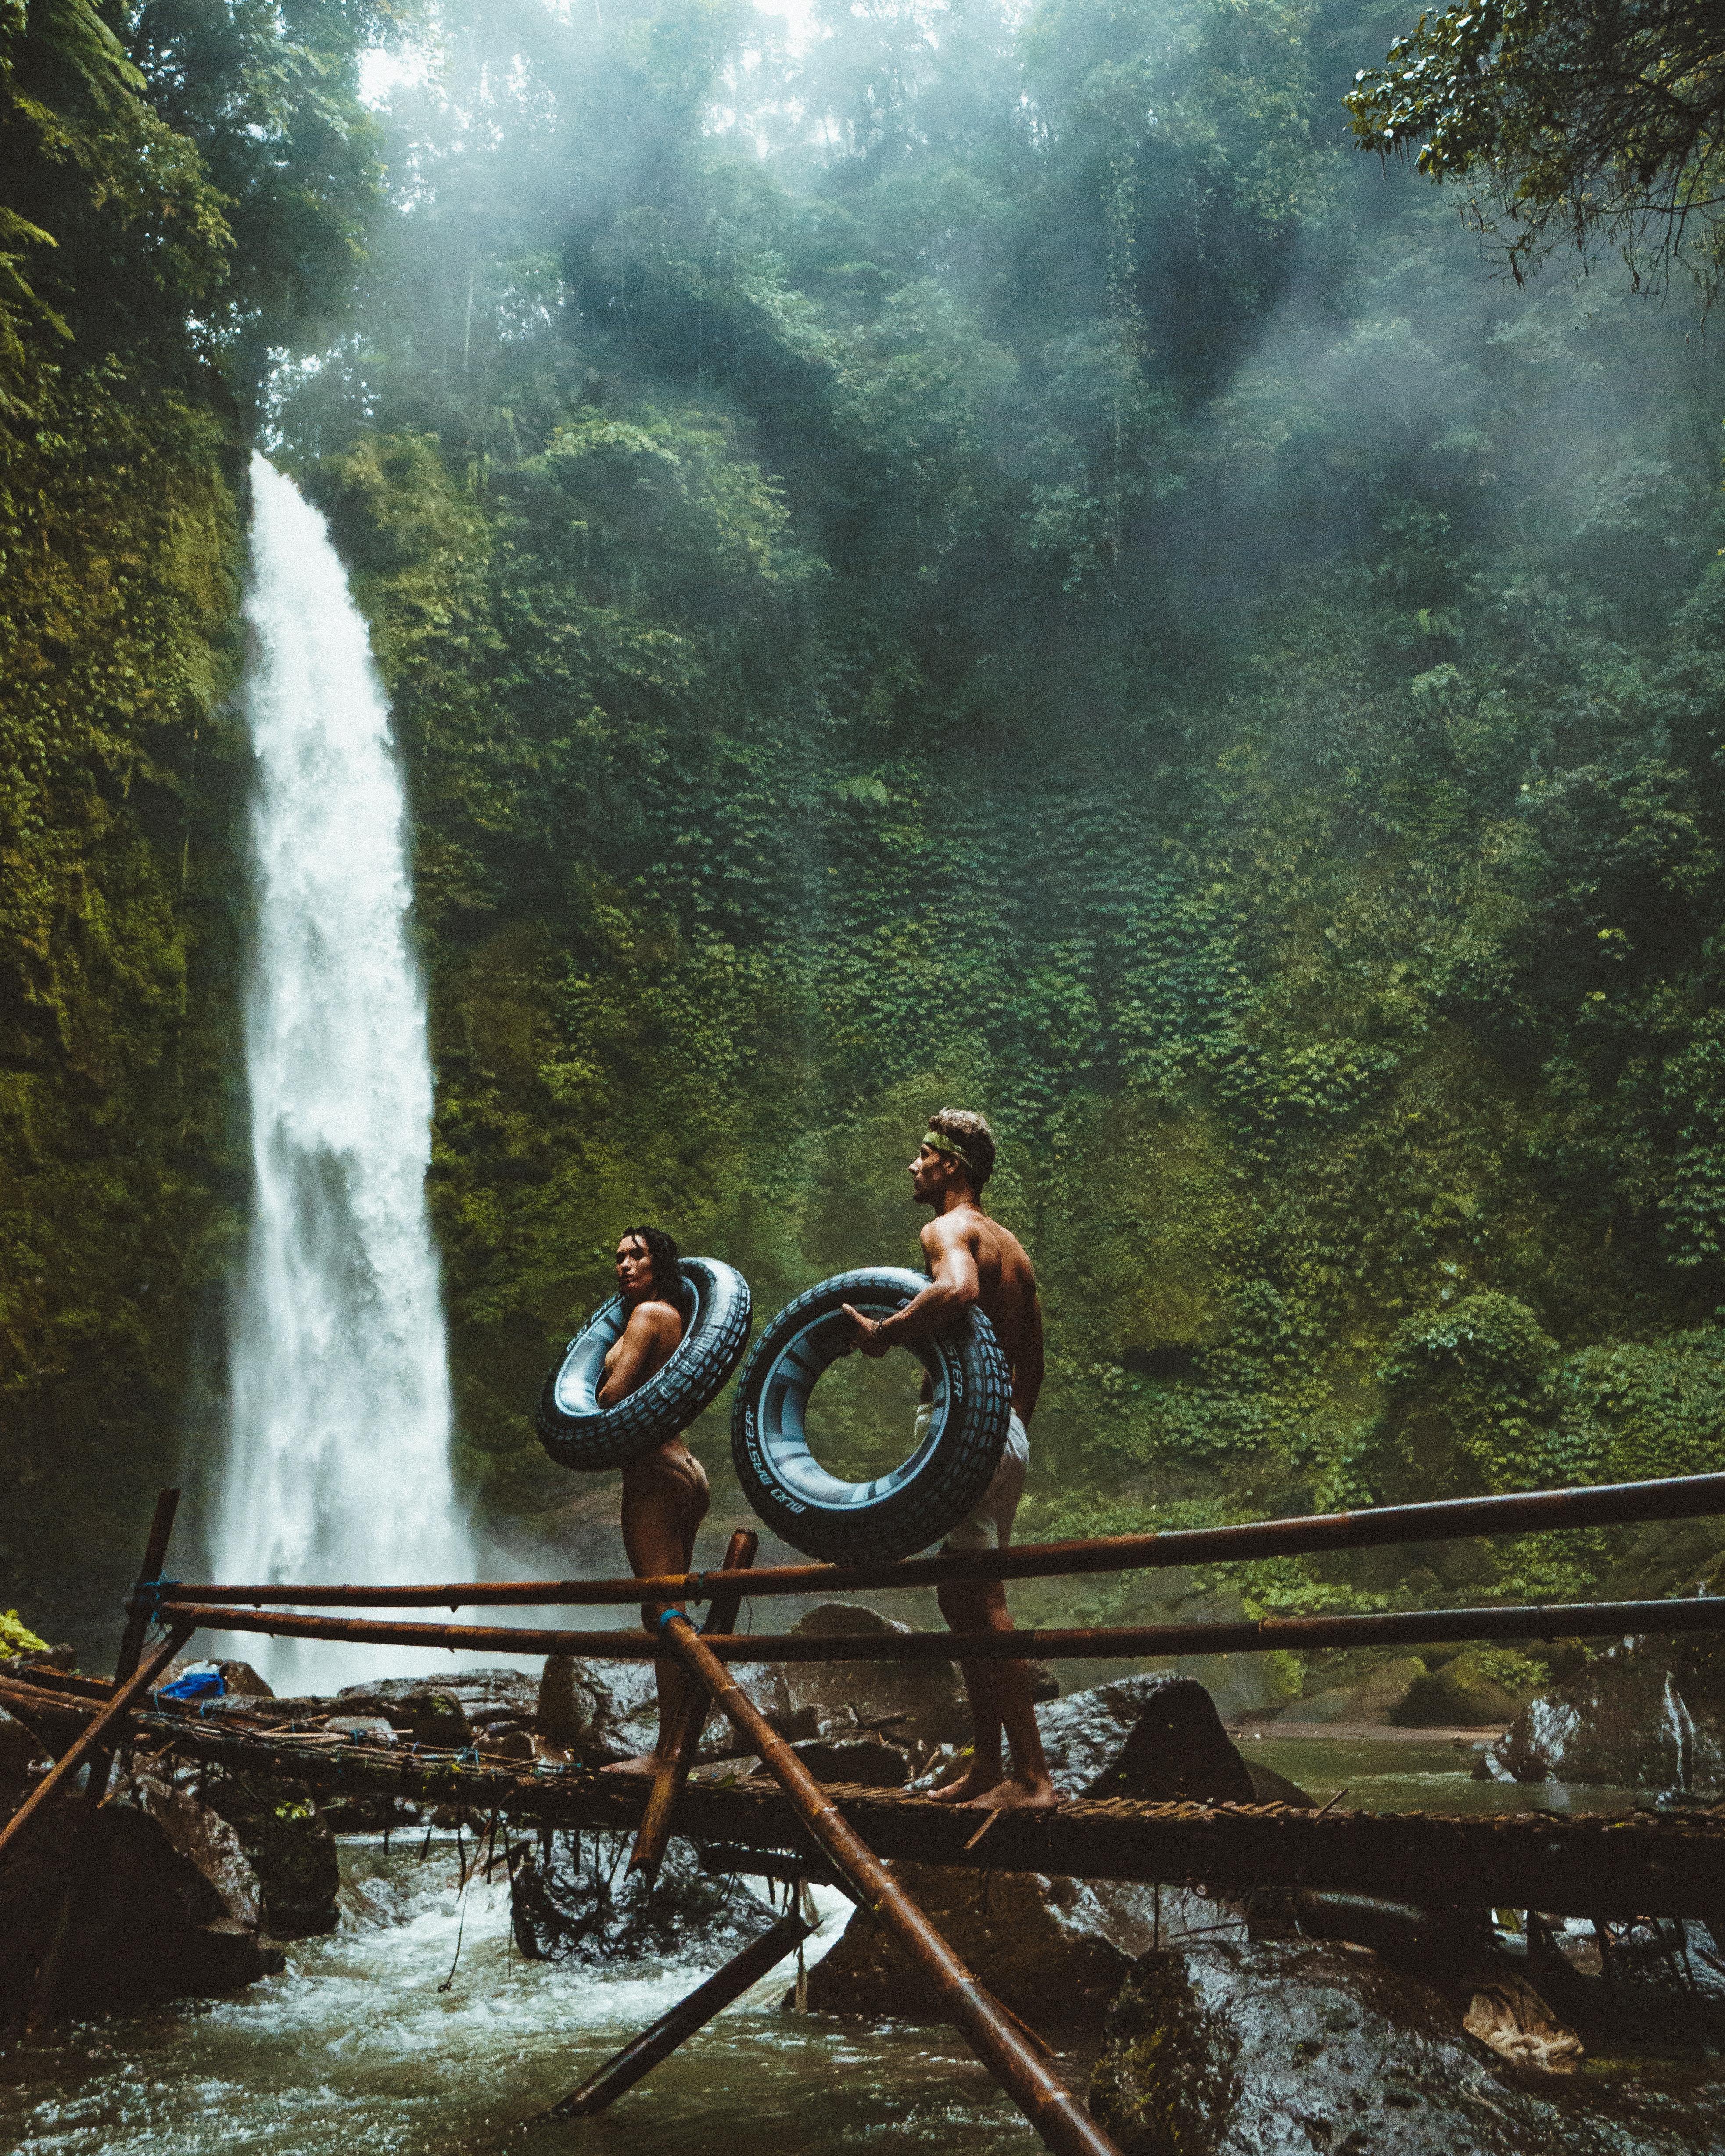 A couple holding float tubes while standing by a waterfall. | Source: Pexels